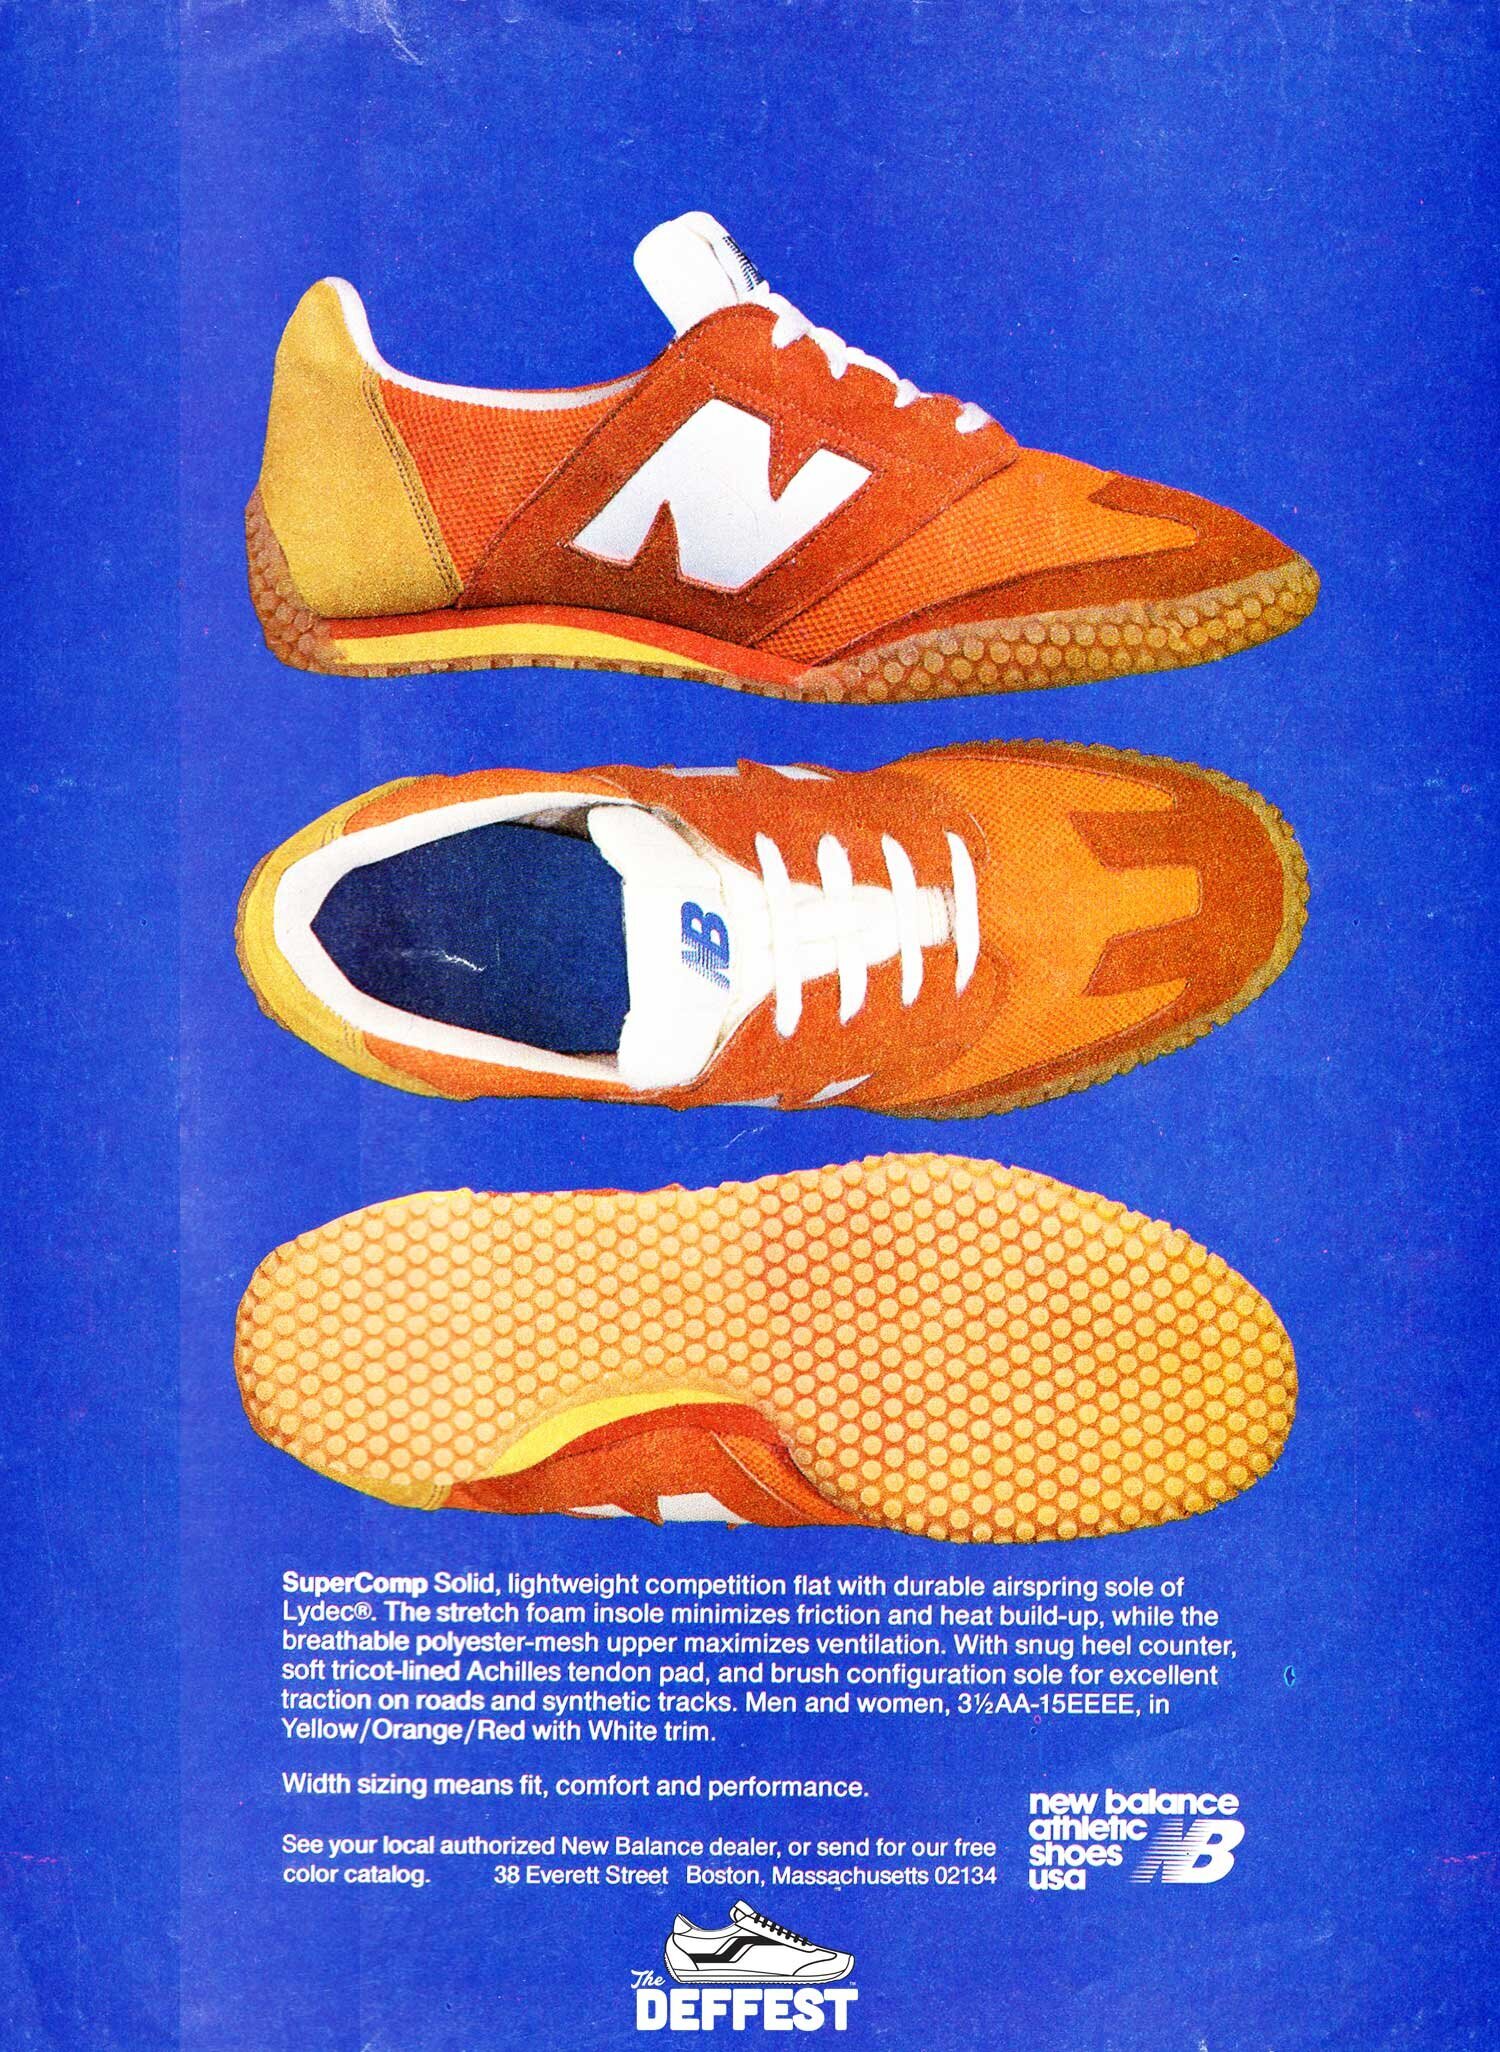 New Balance SuperComp vintage sneaker ad @ The Deffest